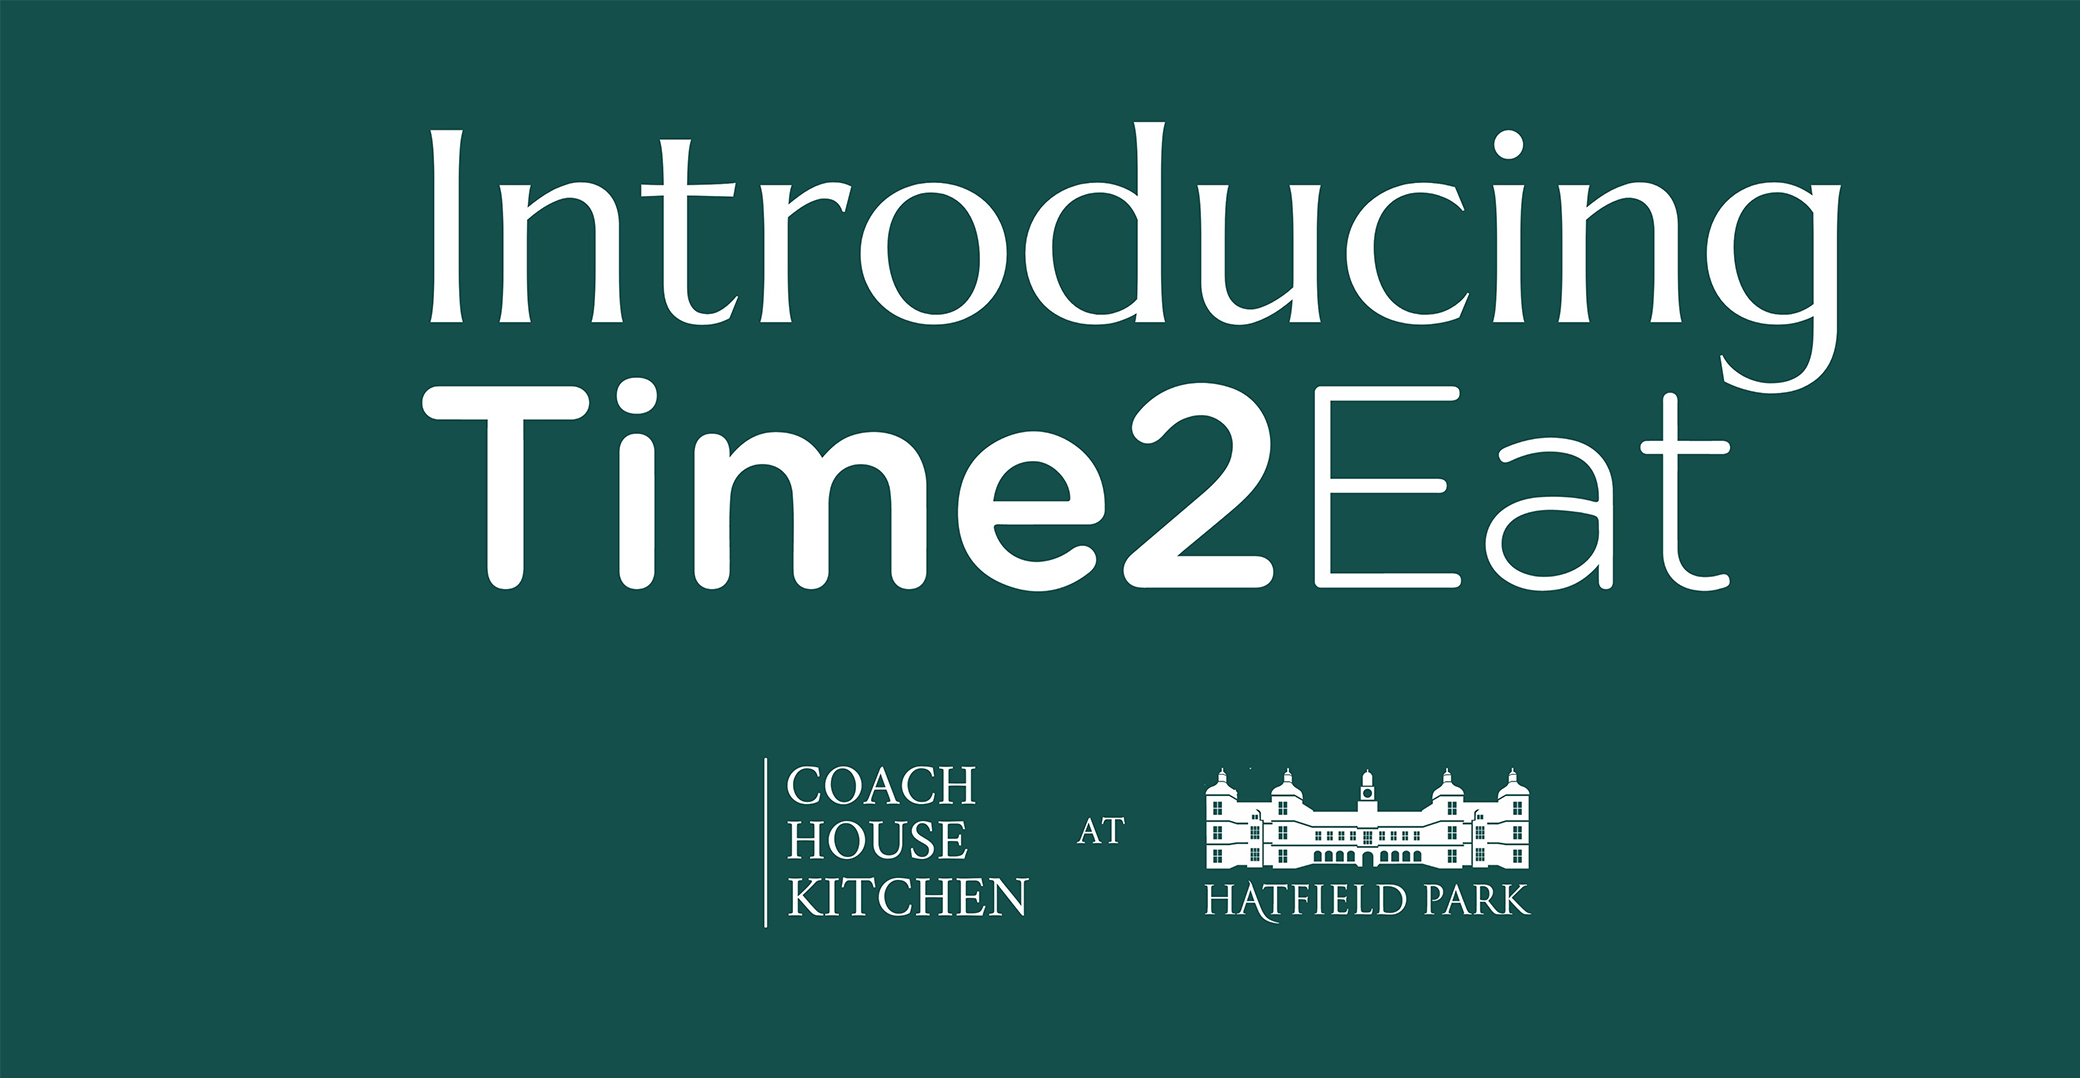 Introducing The Time2Eat App - Hatfield Park